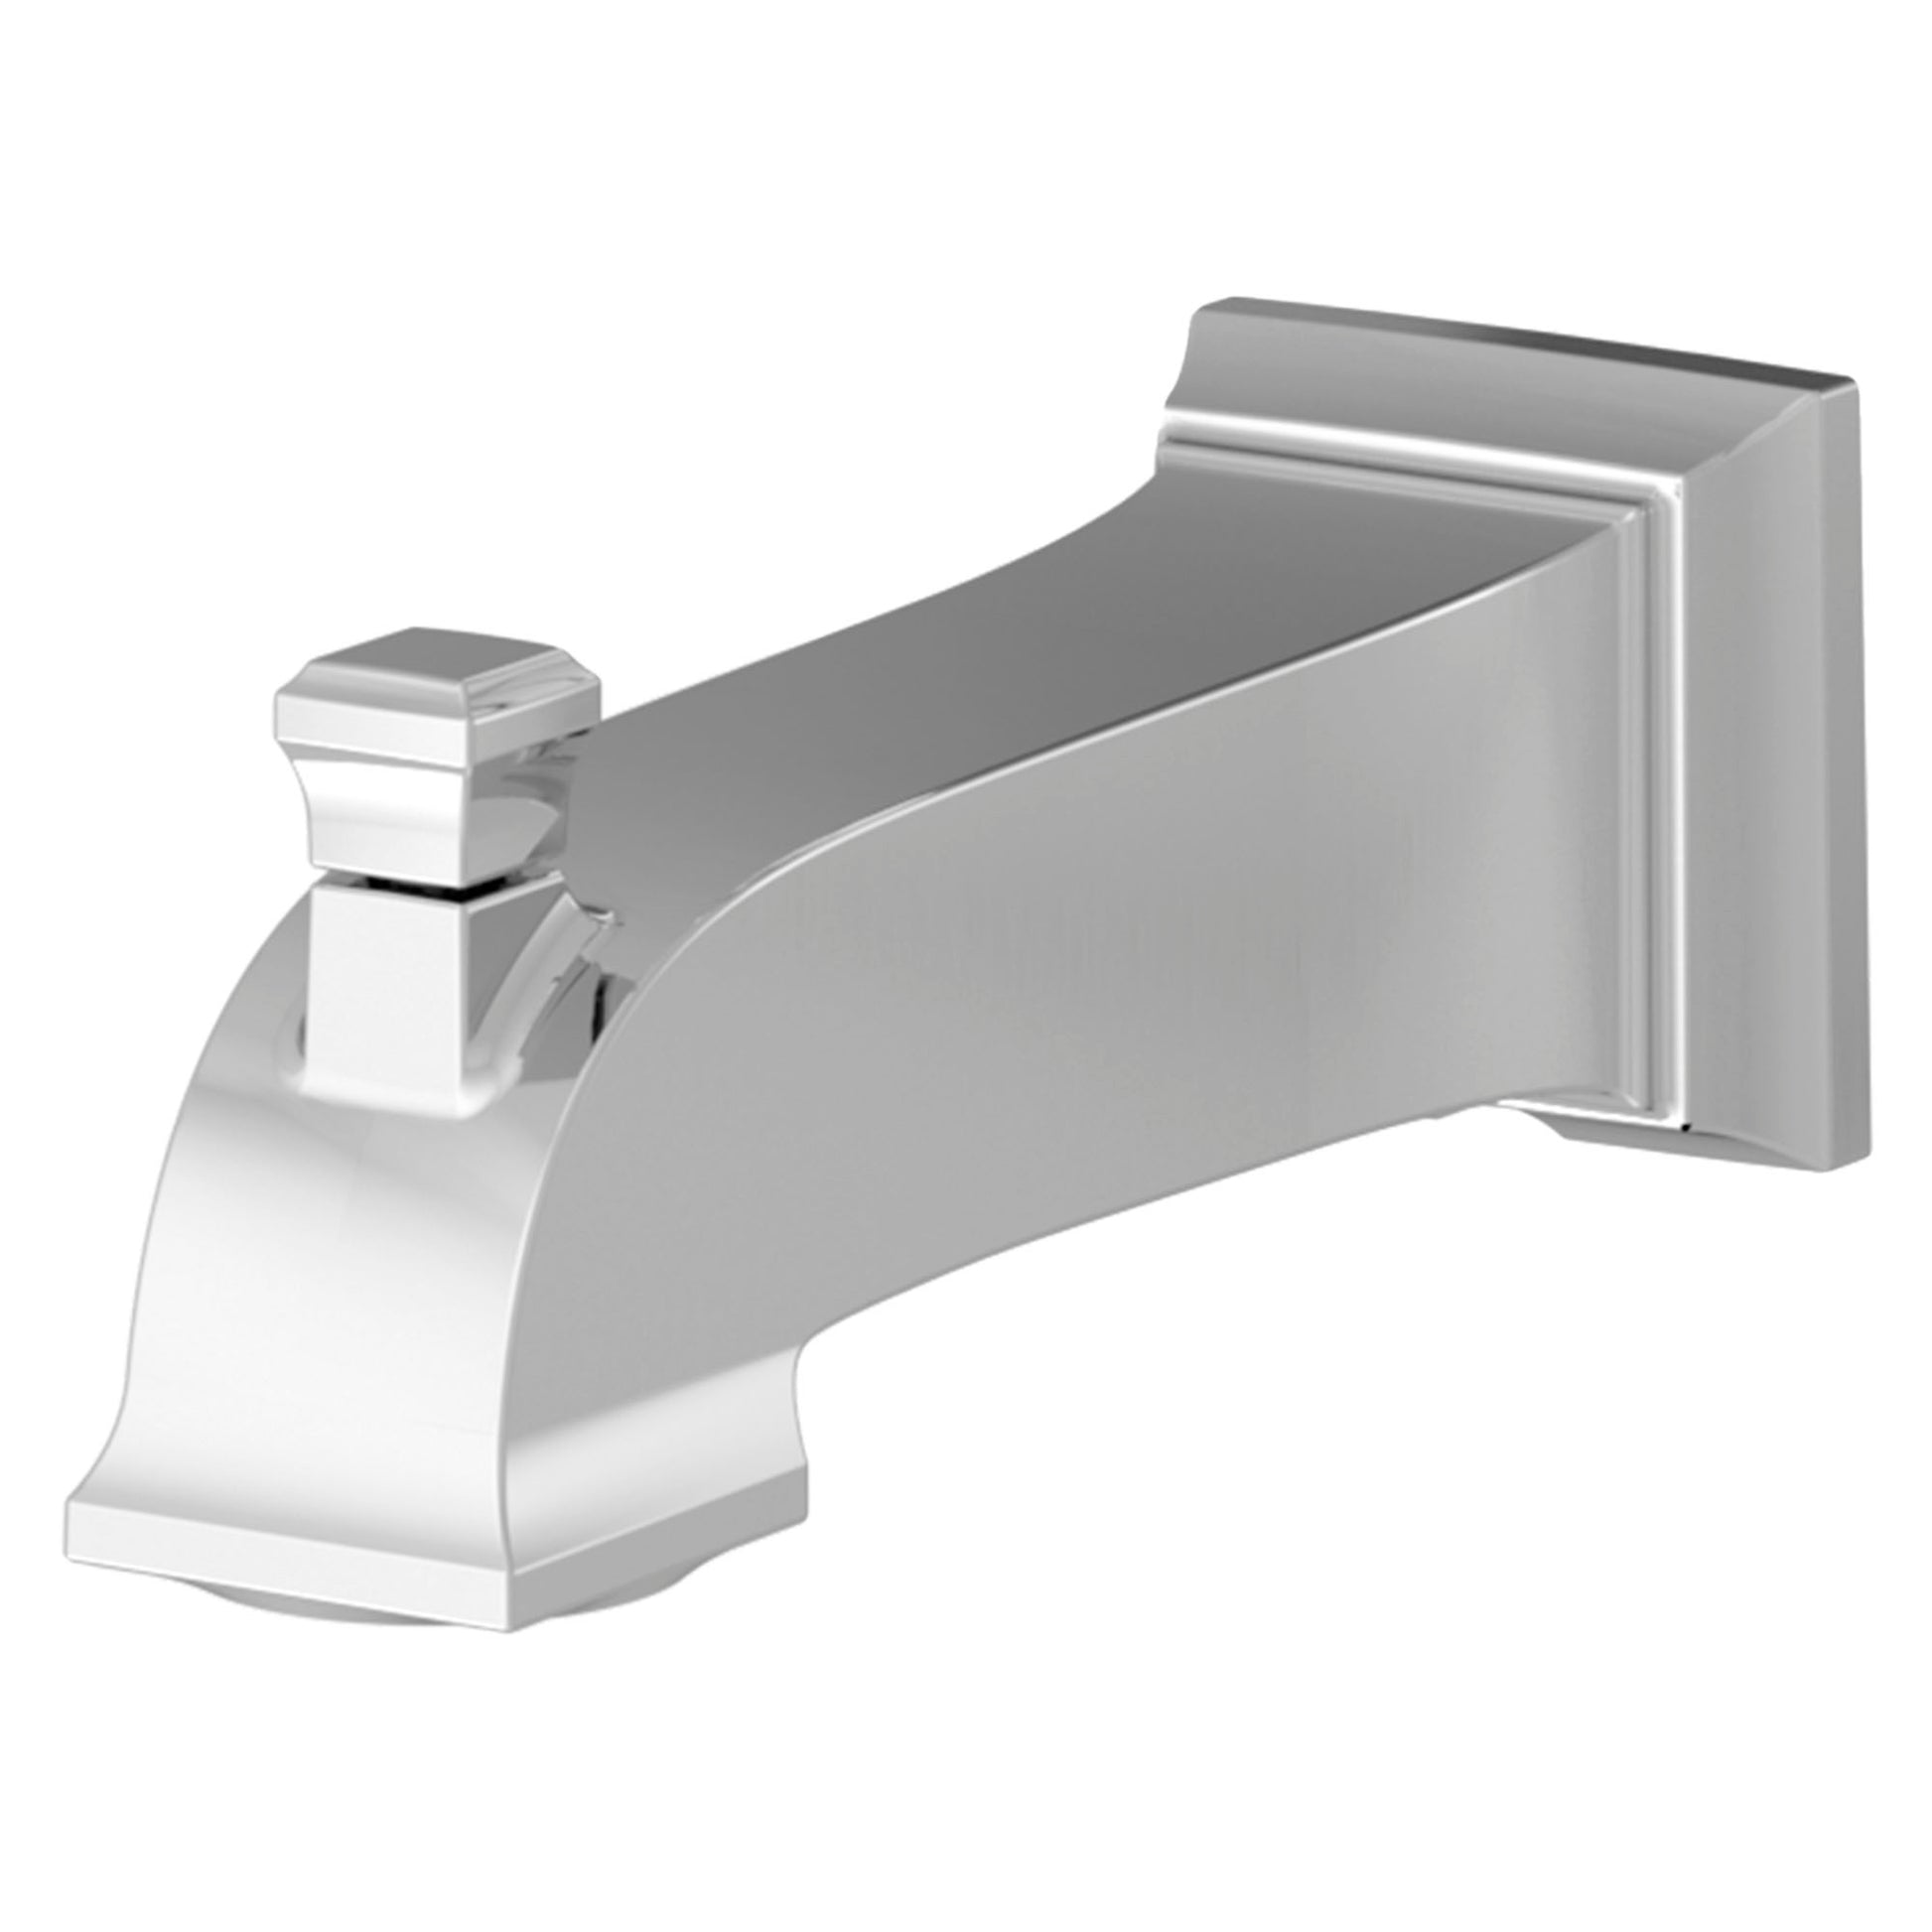 AMERICAN-STANDARD 8888108.002, Town Square S 6-3/4-Inch IPS Diverter Tub Spout in Chrome